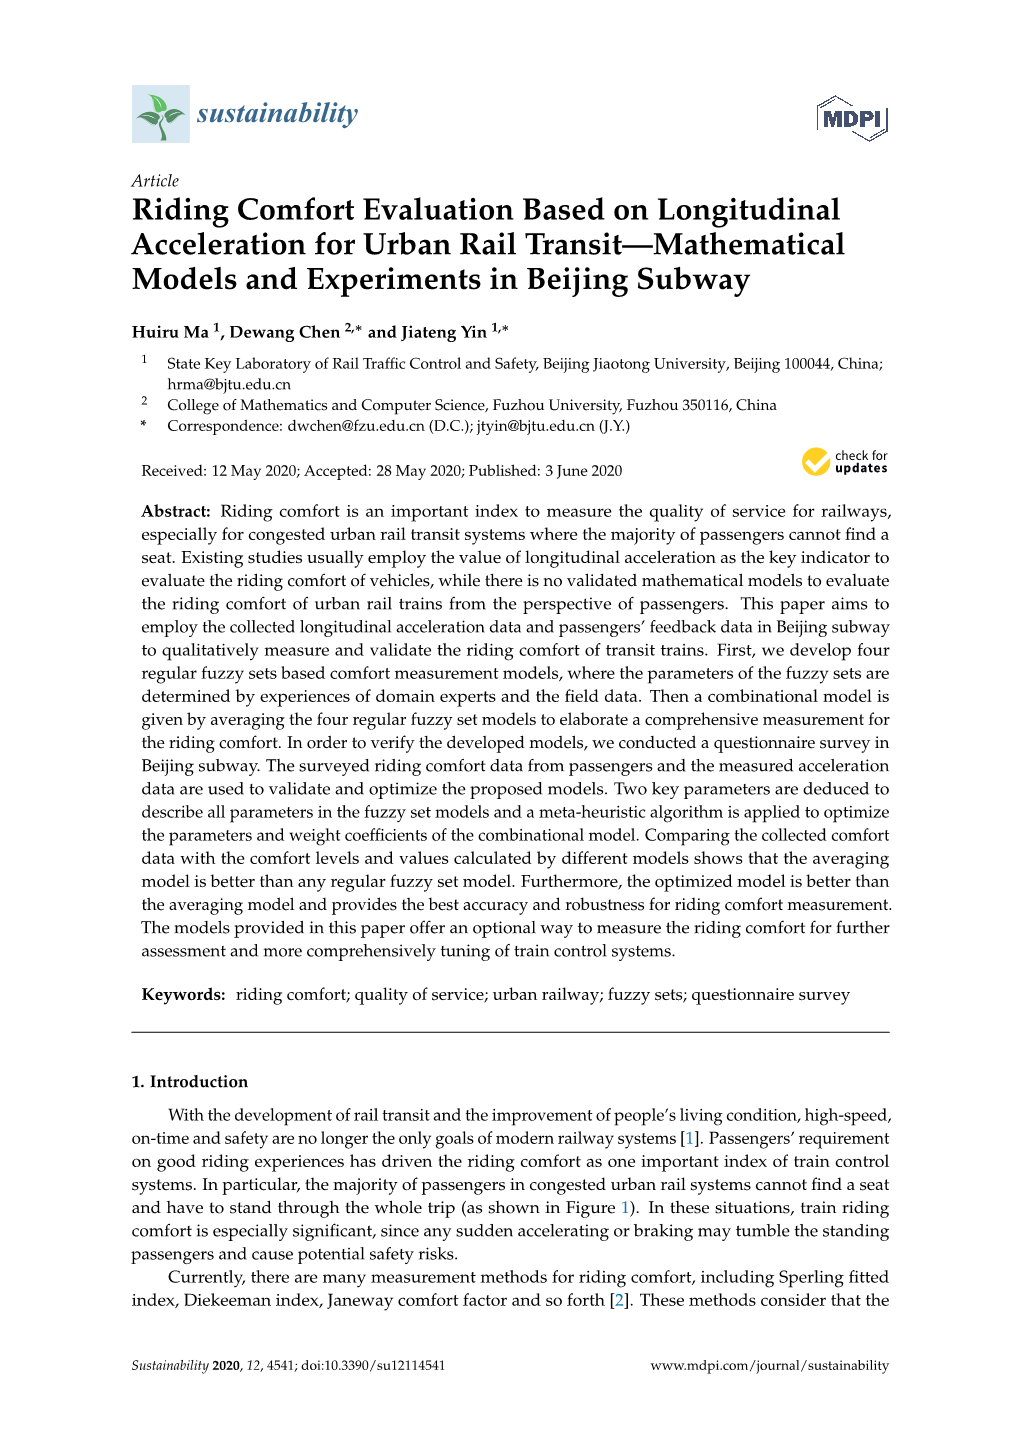 Riding Comfort Evaluation Based on Longitudinal Acceleration for Urban Rail Transit—Mathematical Models and Experiments in Beijing Subway